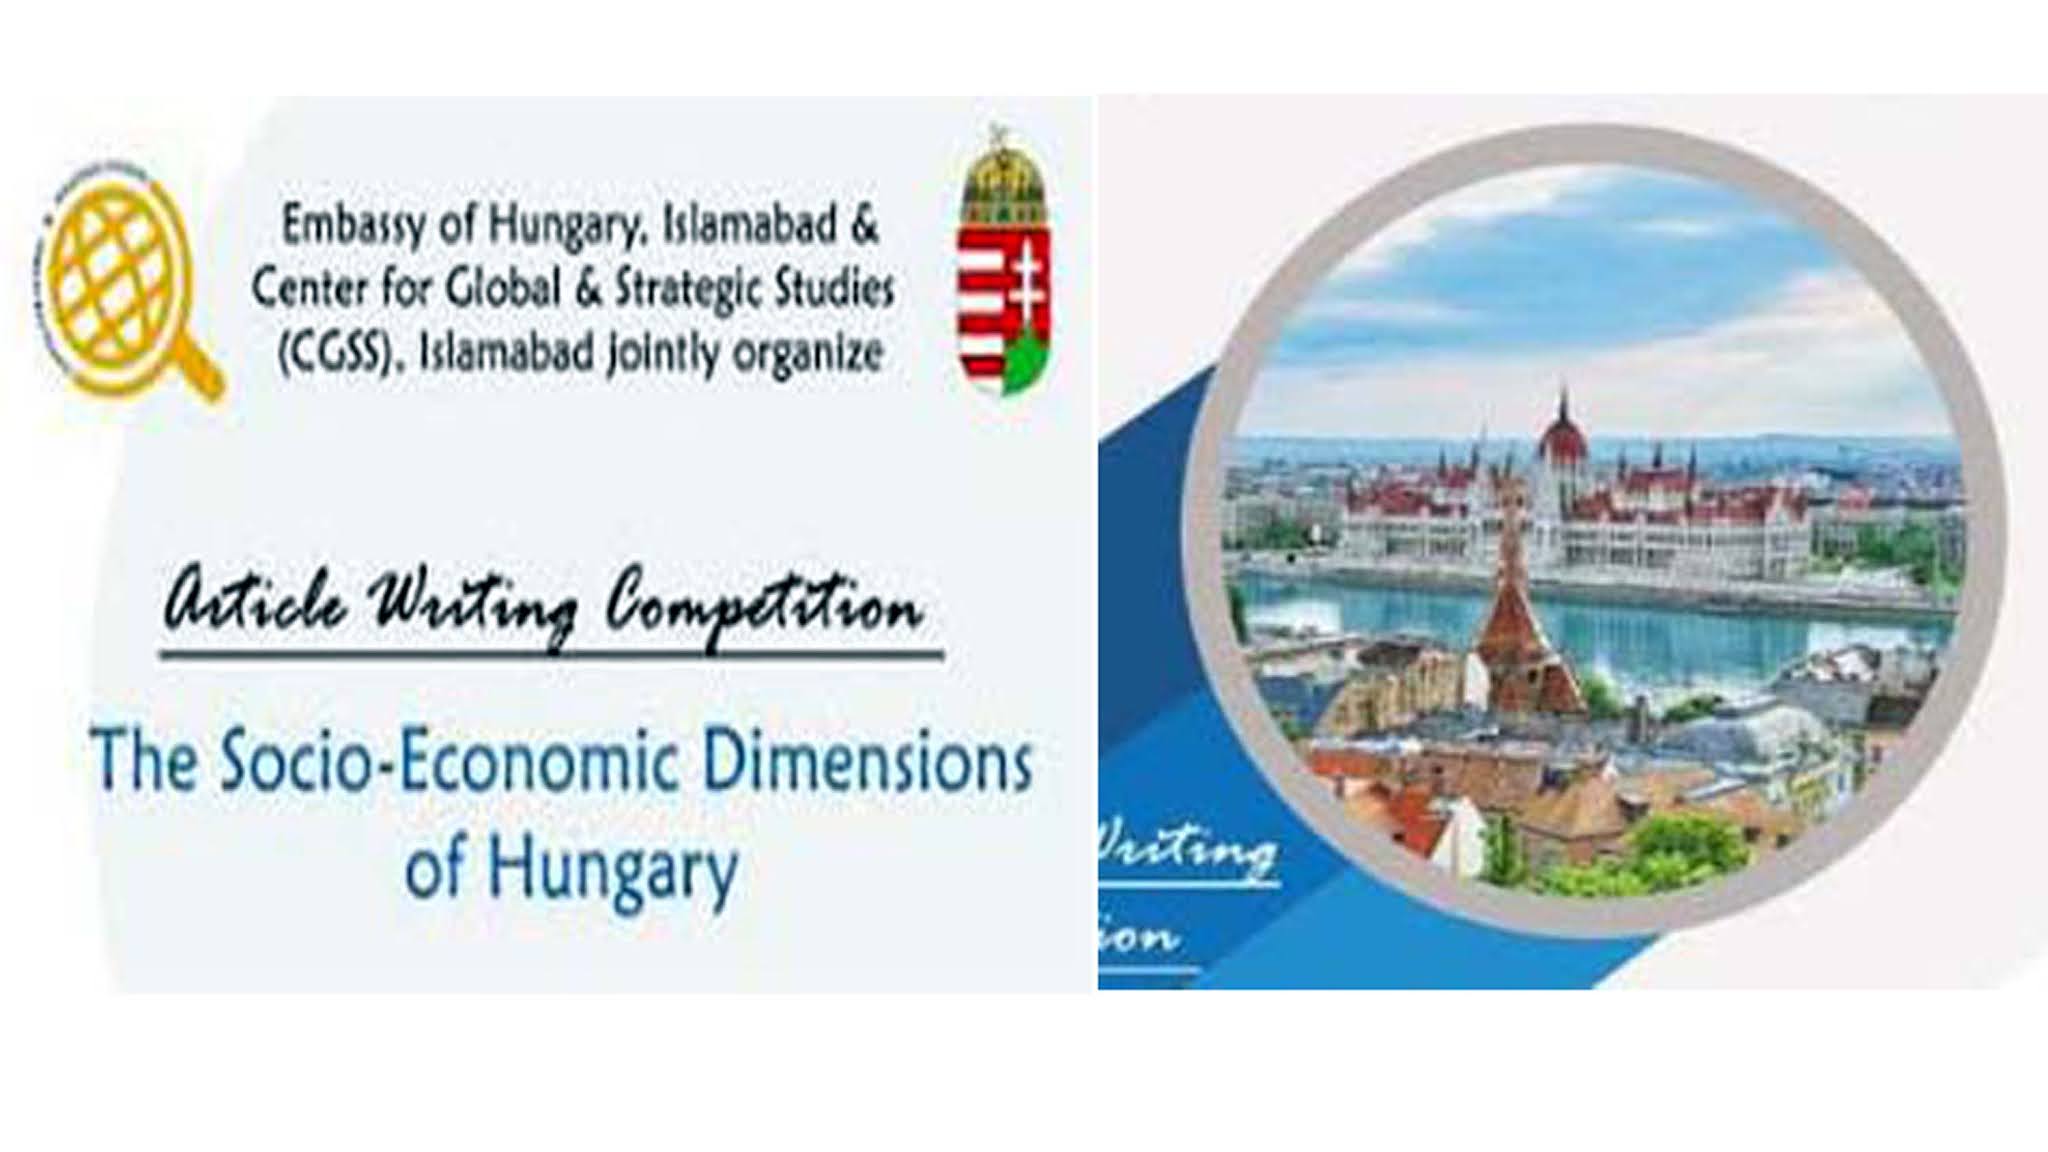 Embassy of Hungary in Islamabad, CGSS to jointly organize article writing competition